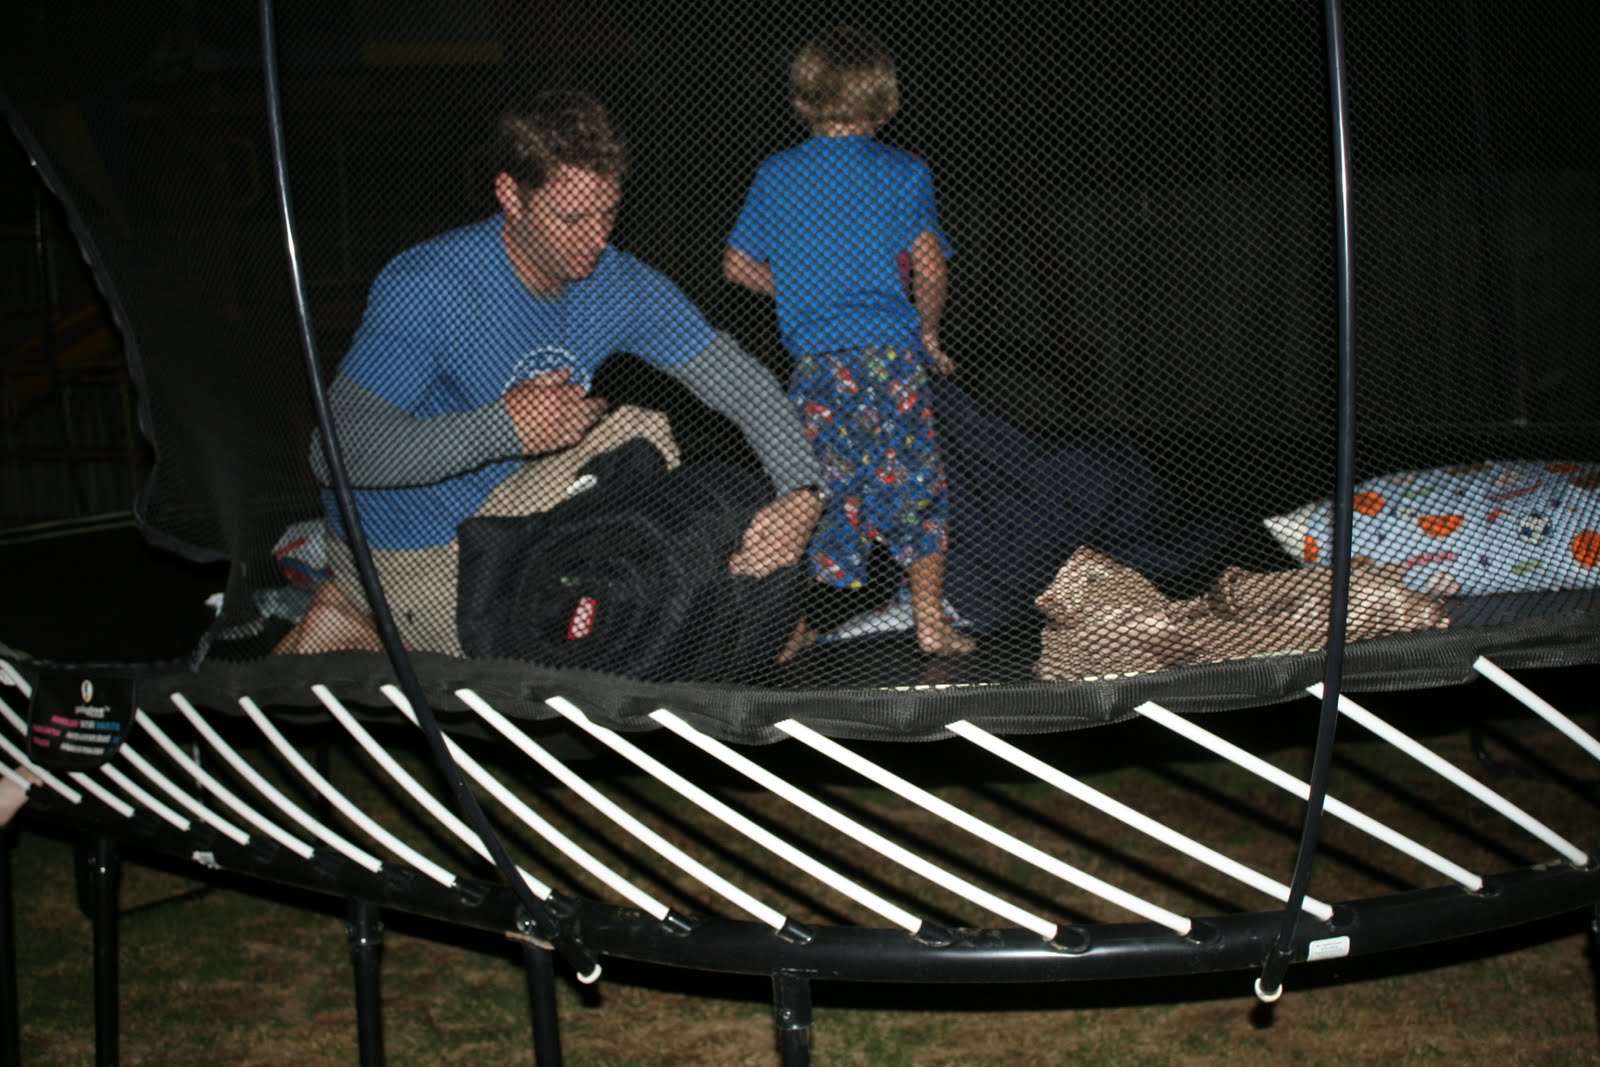 Life with the Hartsock's Sleeping on the Trampoline